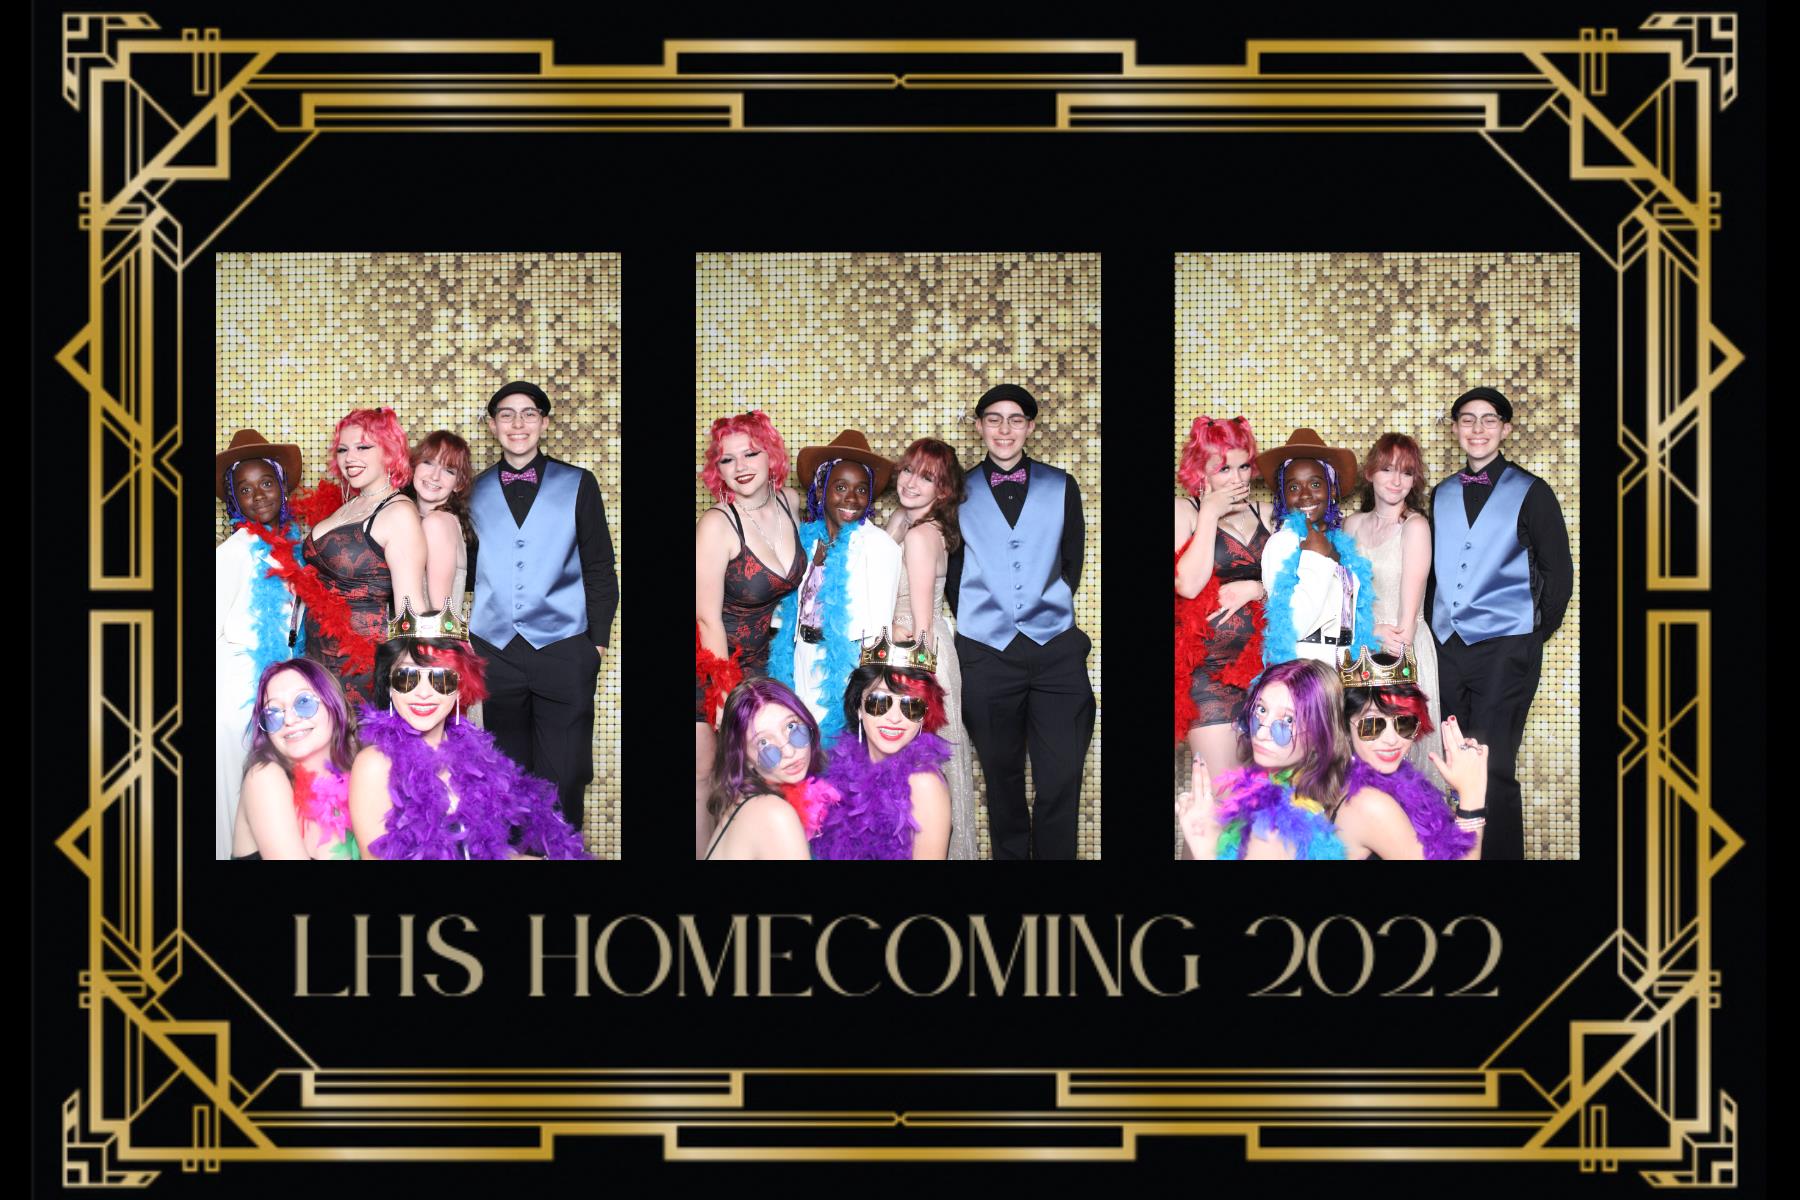 Photobooth photo from high school homecoming dance